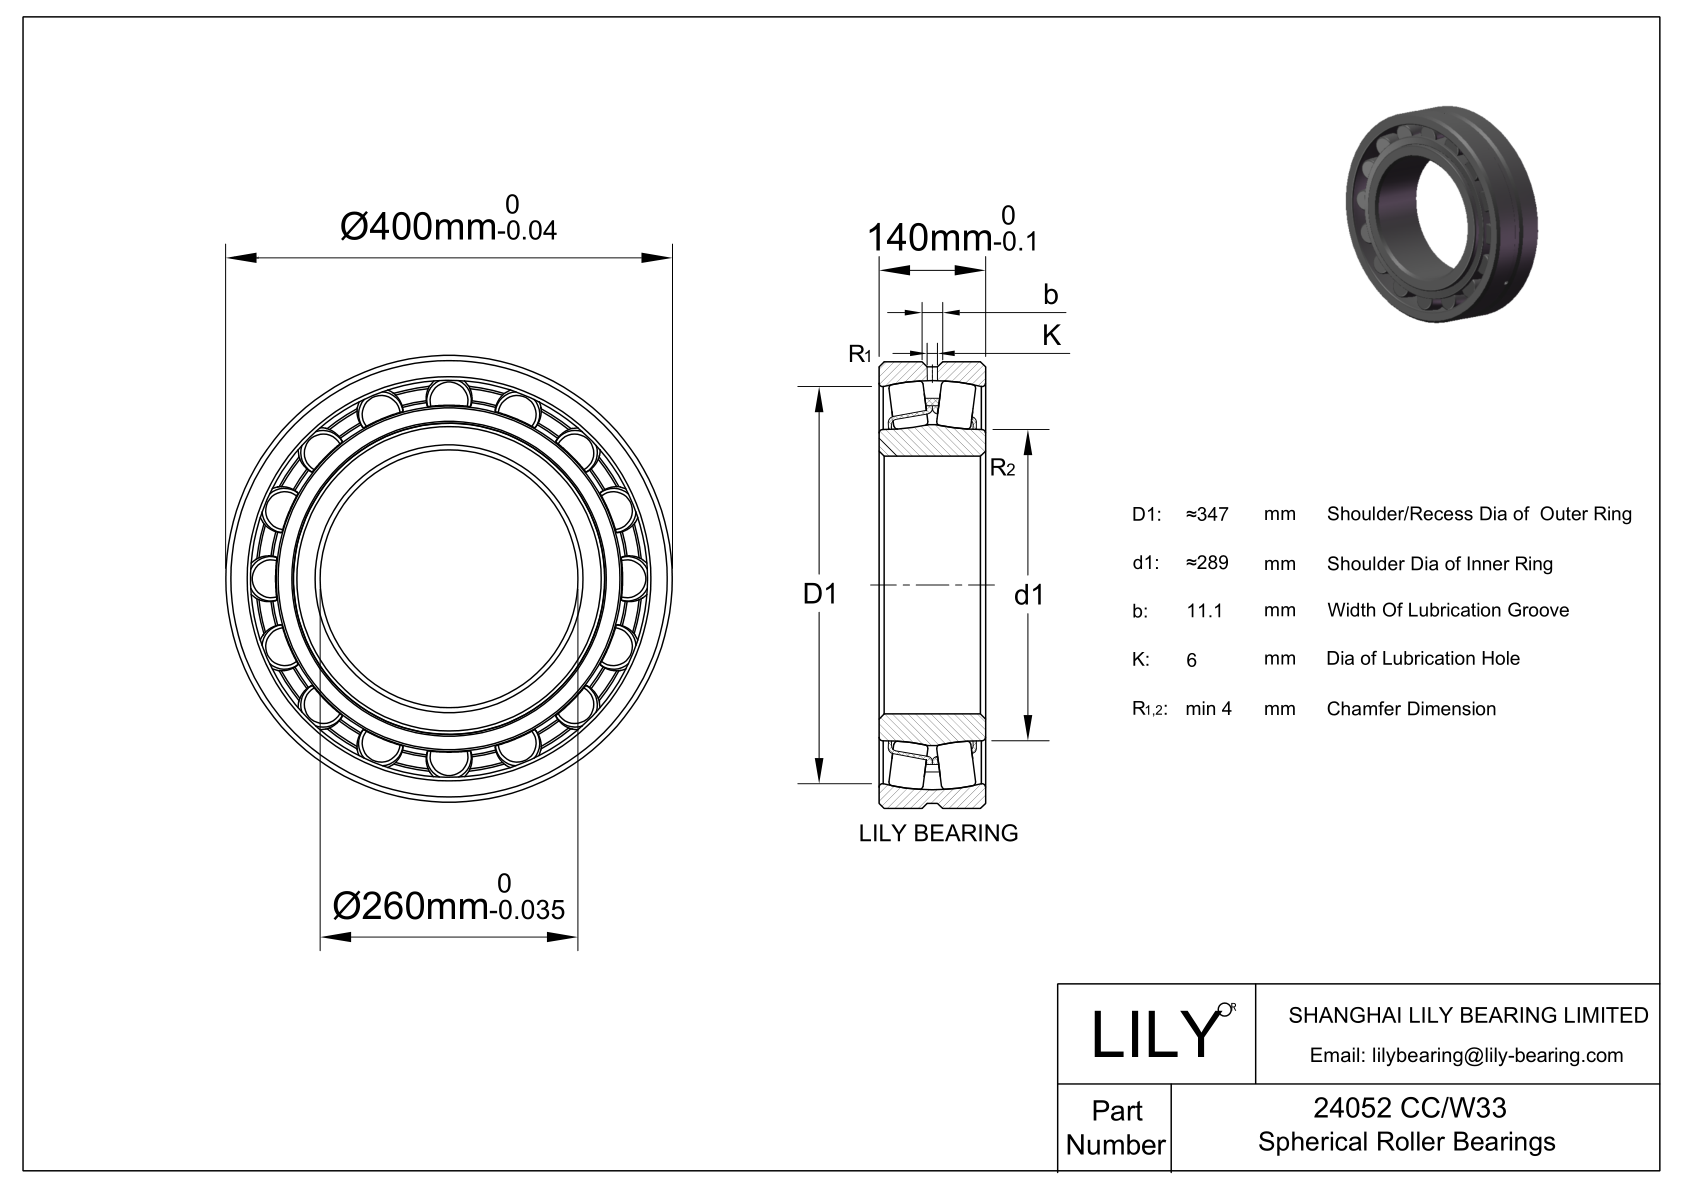 24052 CC/W33 Double Row Spherical Roller Bearing cad drawing